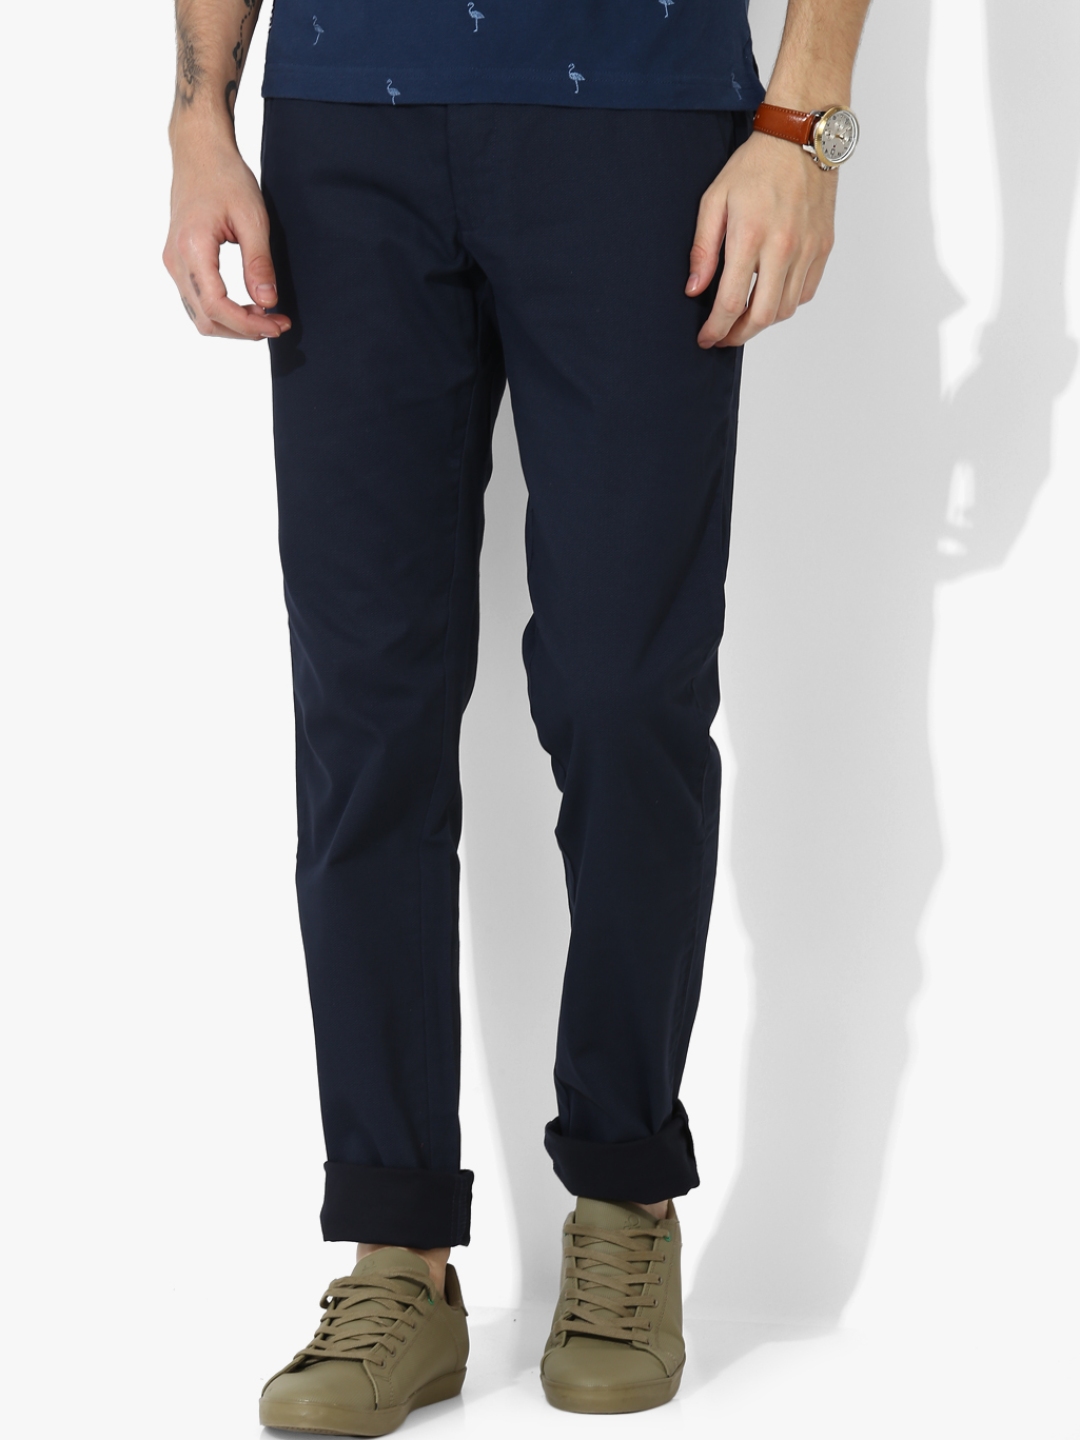 Buy Navy Blue Solid Slim Fit Chinos - Trousers for Men 7936951 | Myntra